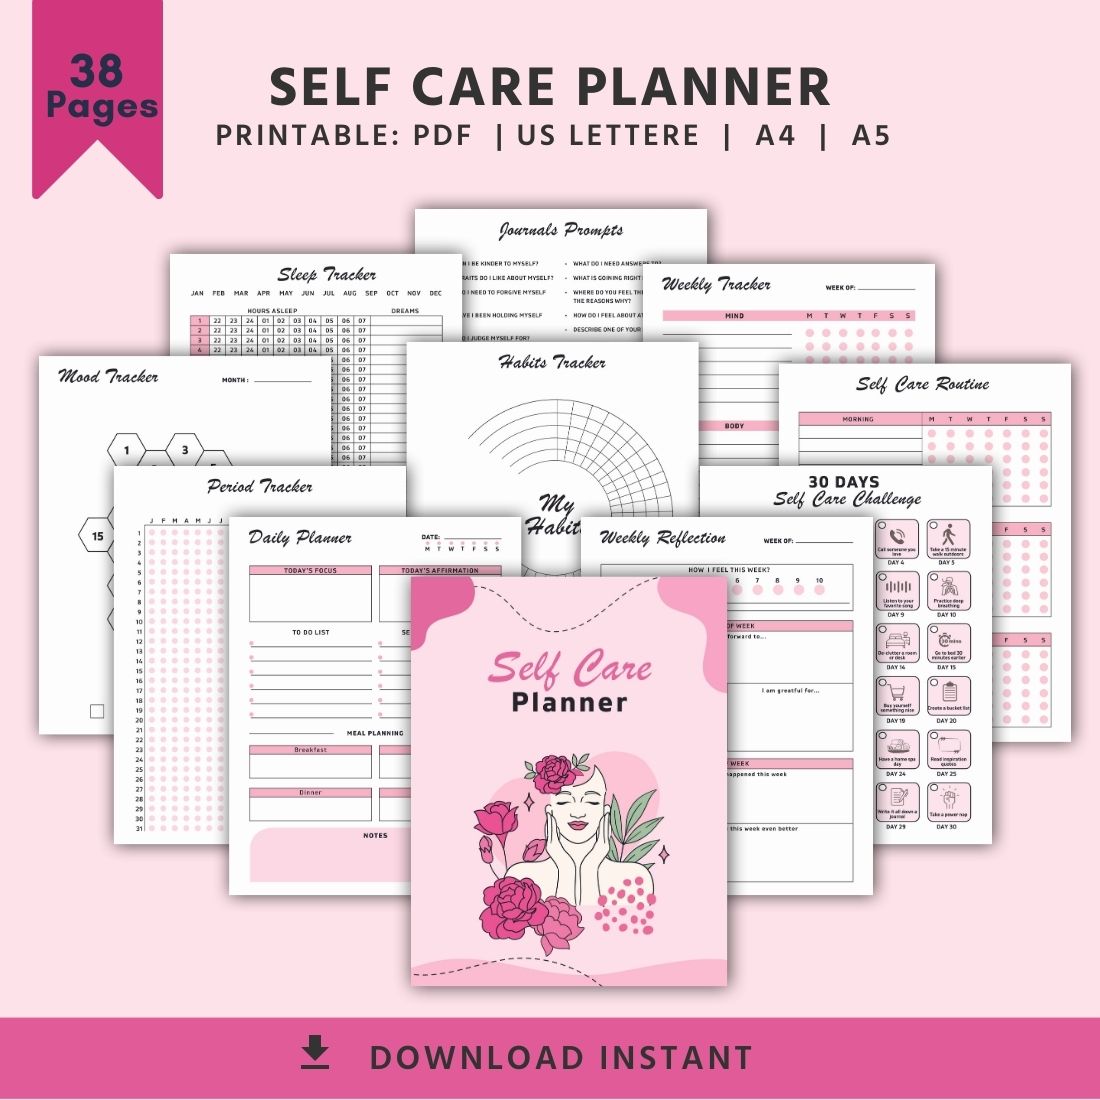 Self Care Planner cover image.